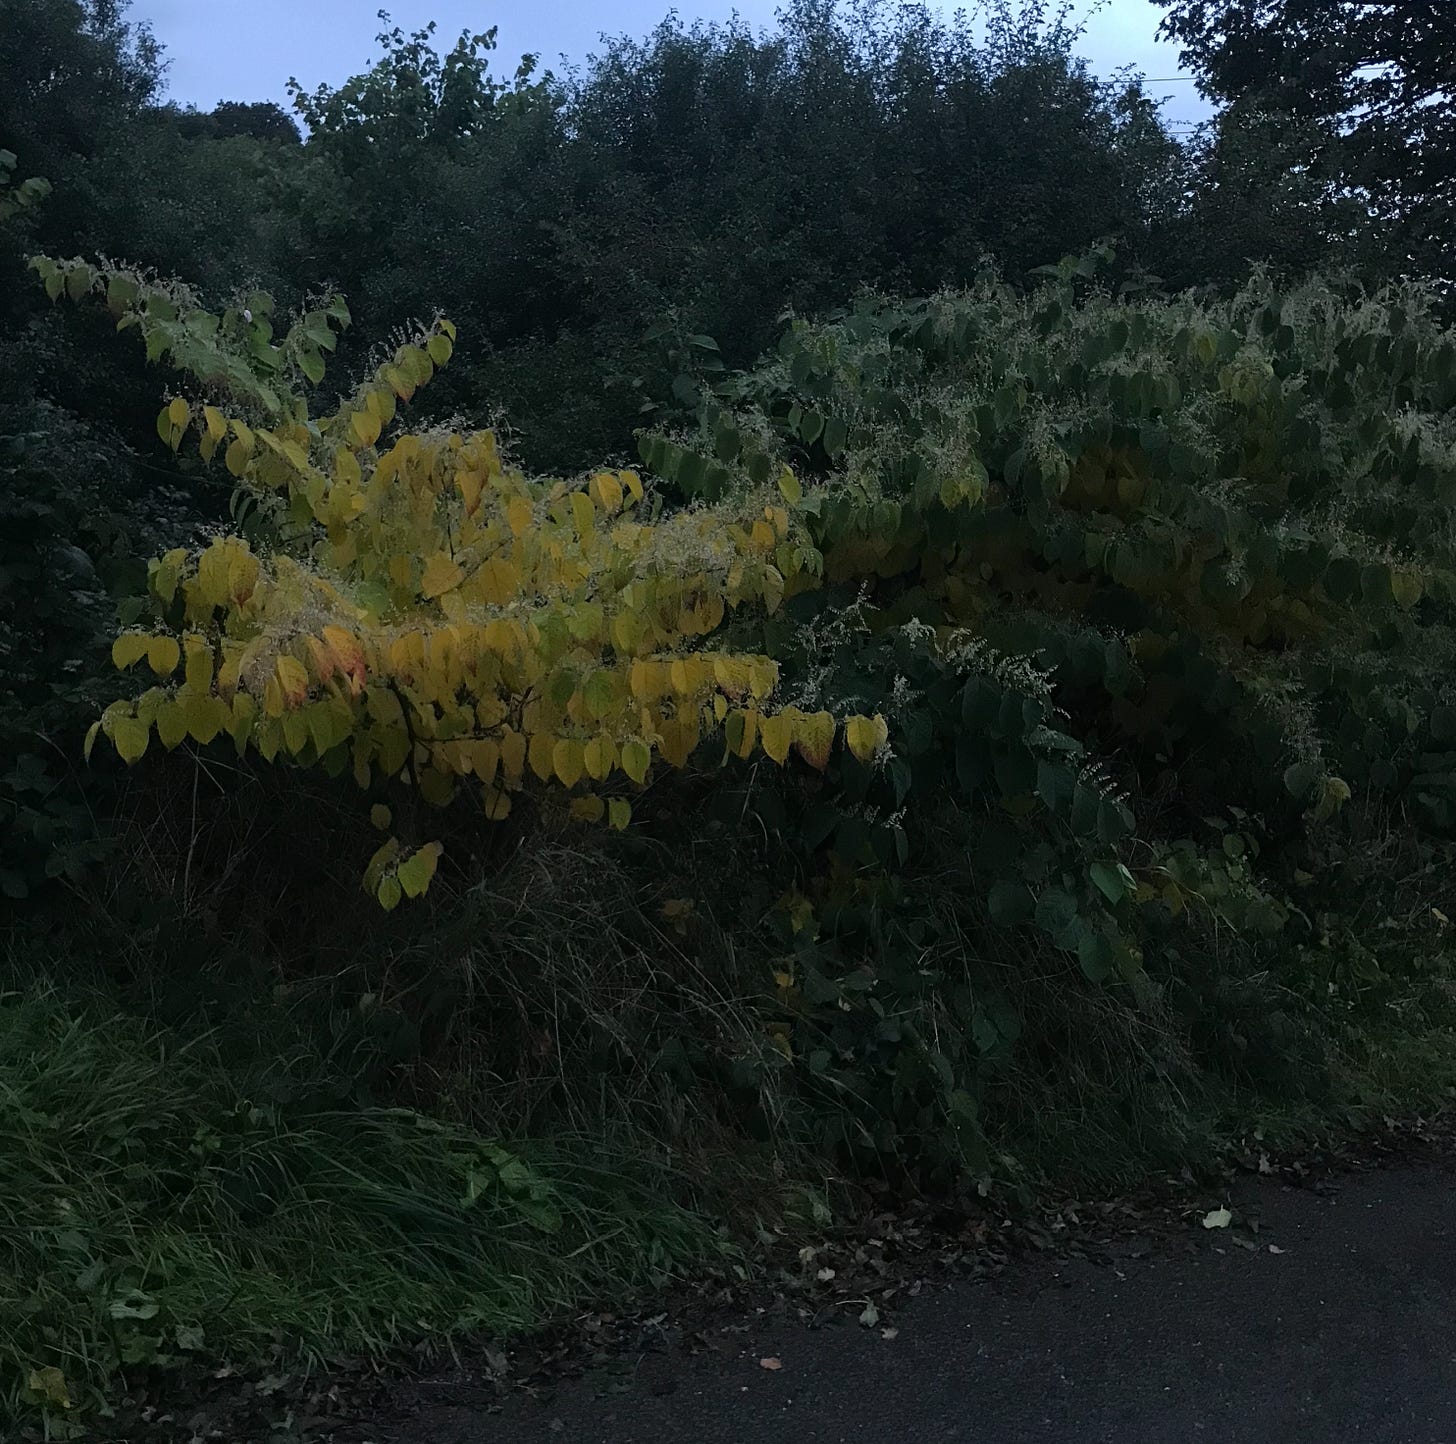 A dusky photo of a hedgerow, a cool blue sky just visible at the top, bushes in various dark greens. A tree with bright yellow teardrop shaped leaves stands out in the foreground.   